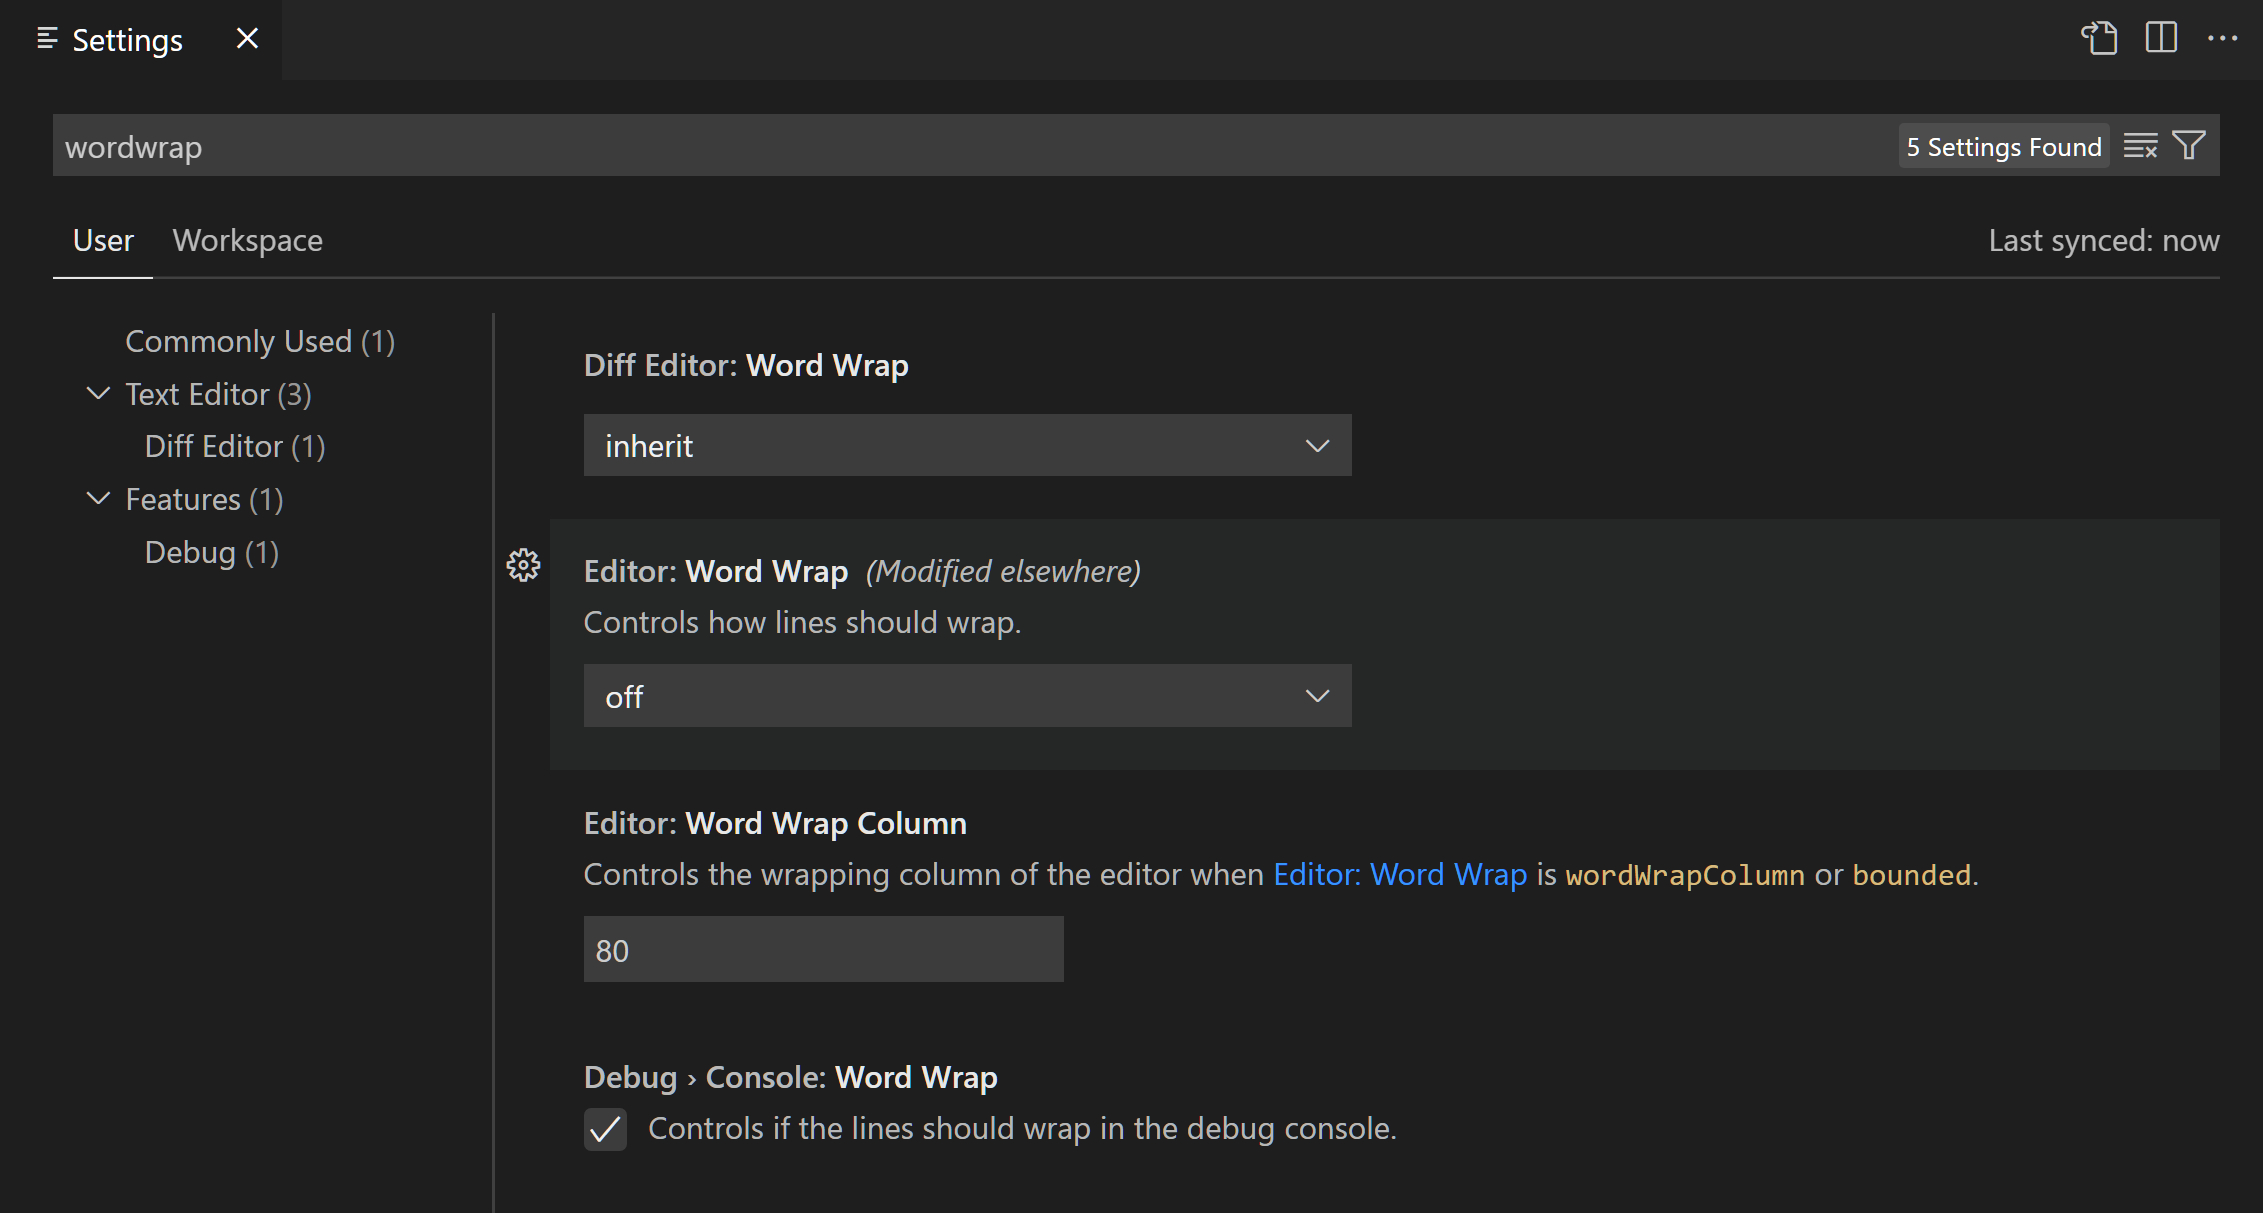 Filtering settings by searching in the Settings editor